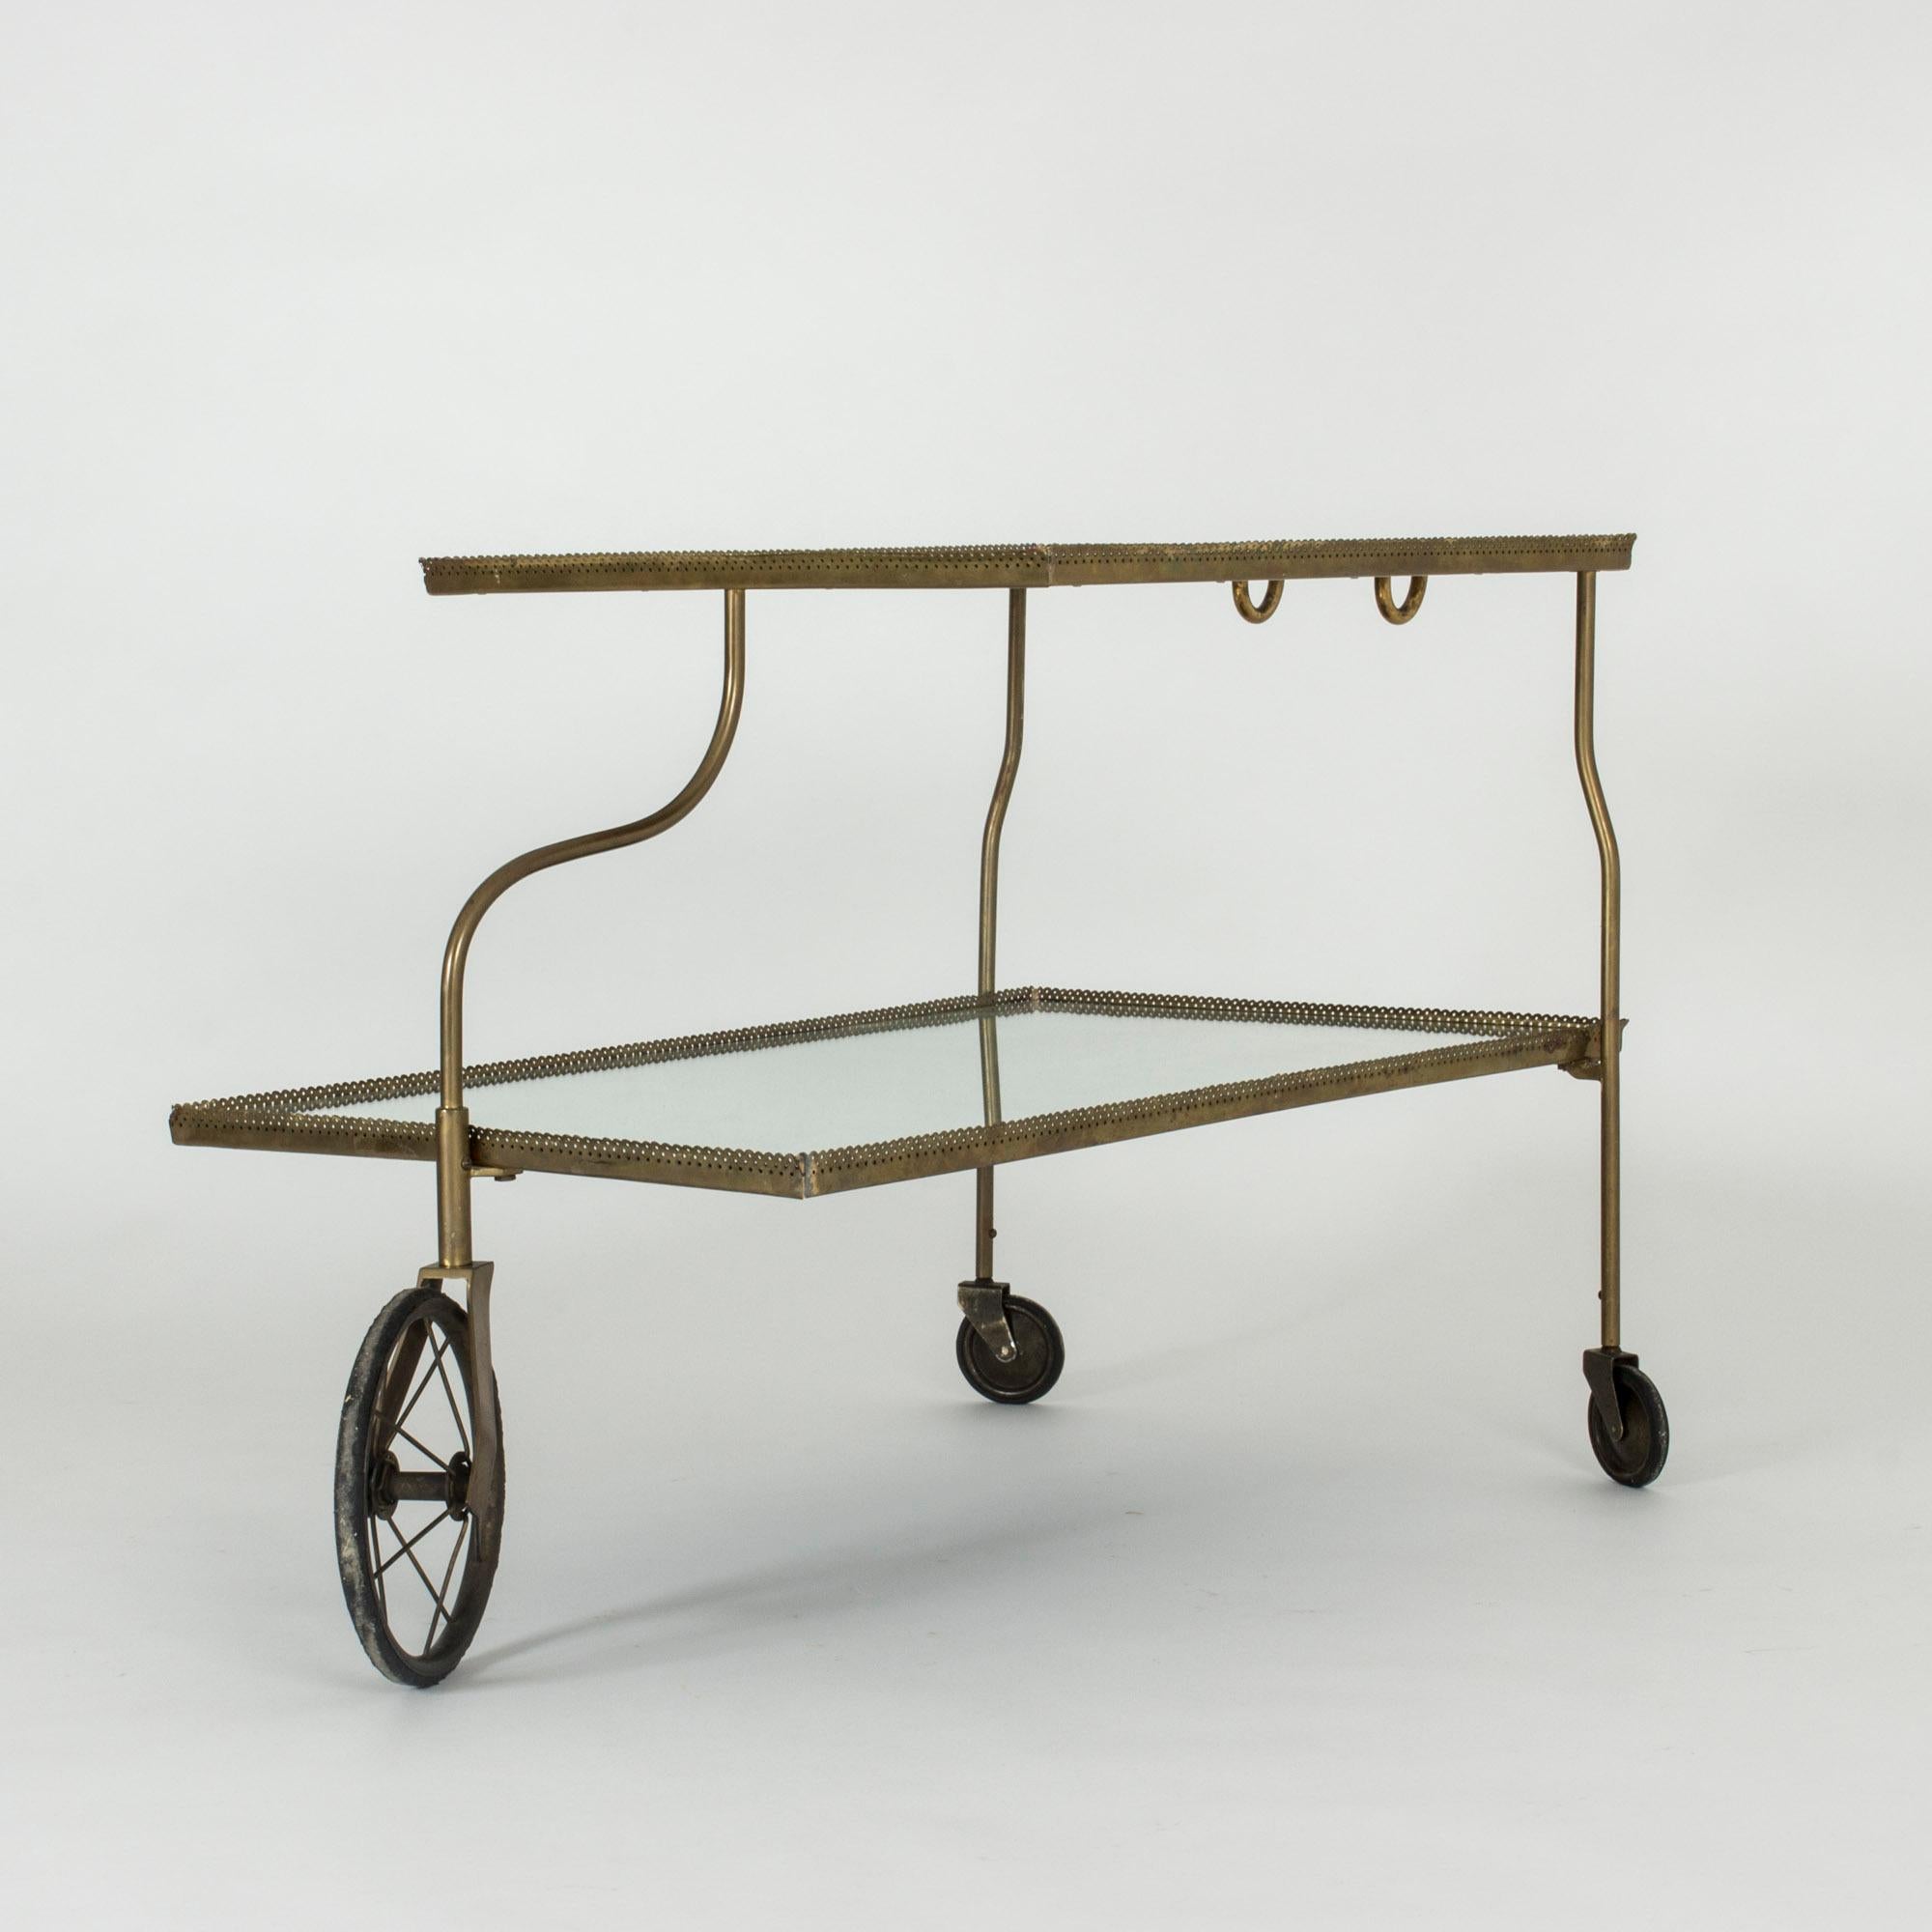 Elegant mirrored glass bar trolley on wheels by Josef Frank, made with a brass frame. The frame has a scalloped edge with a perforated pattern. Light and very decorative design.